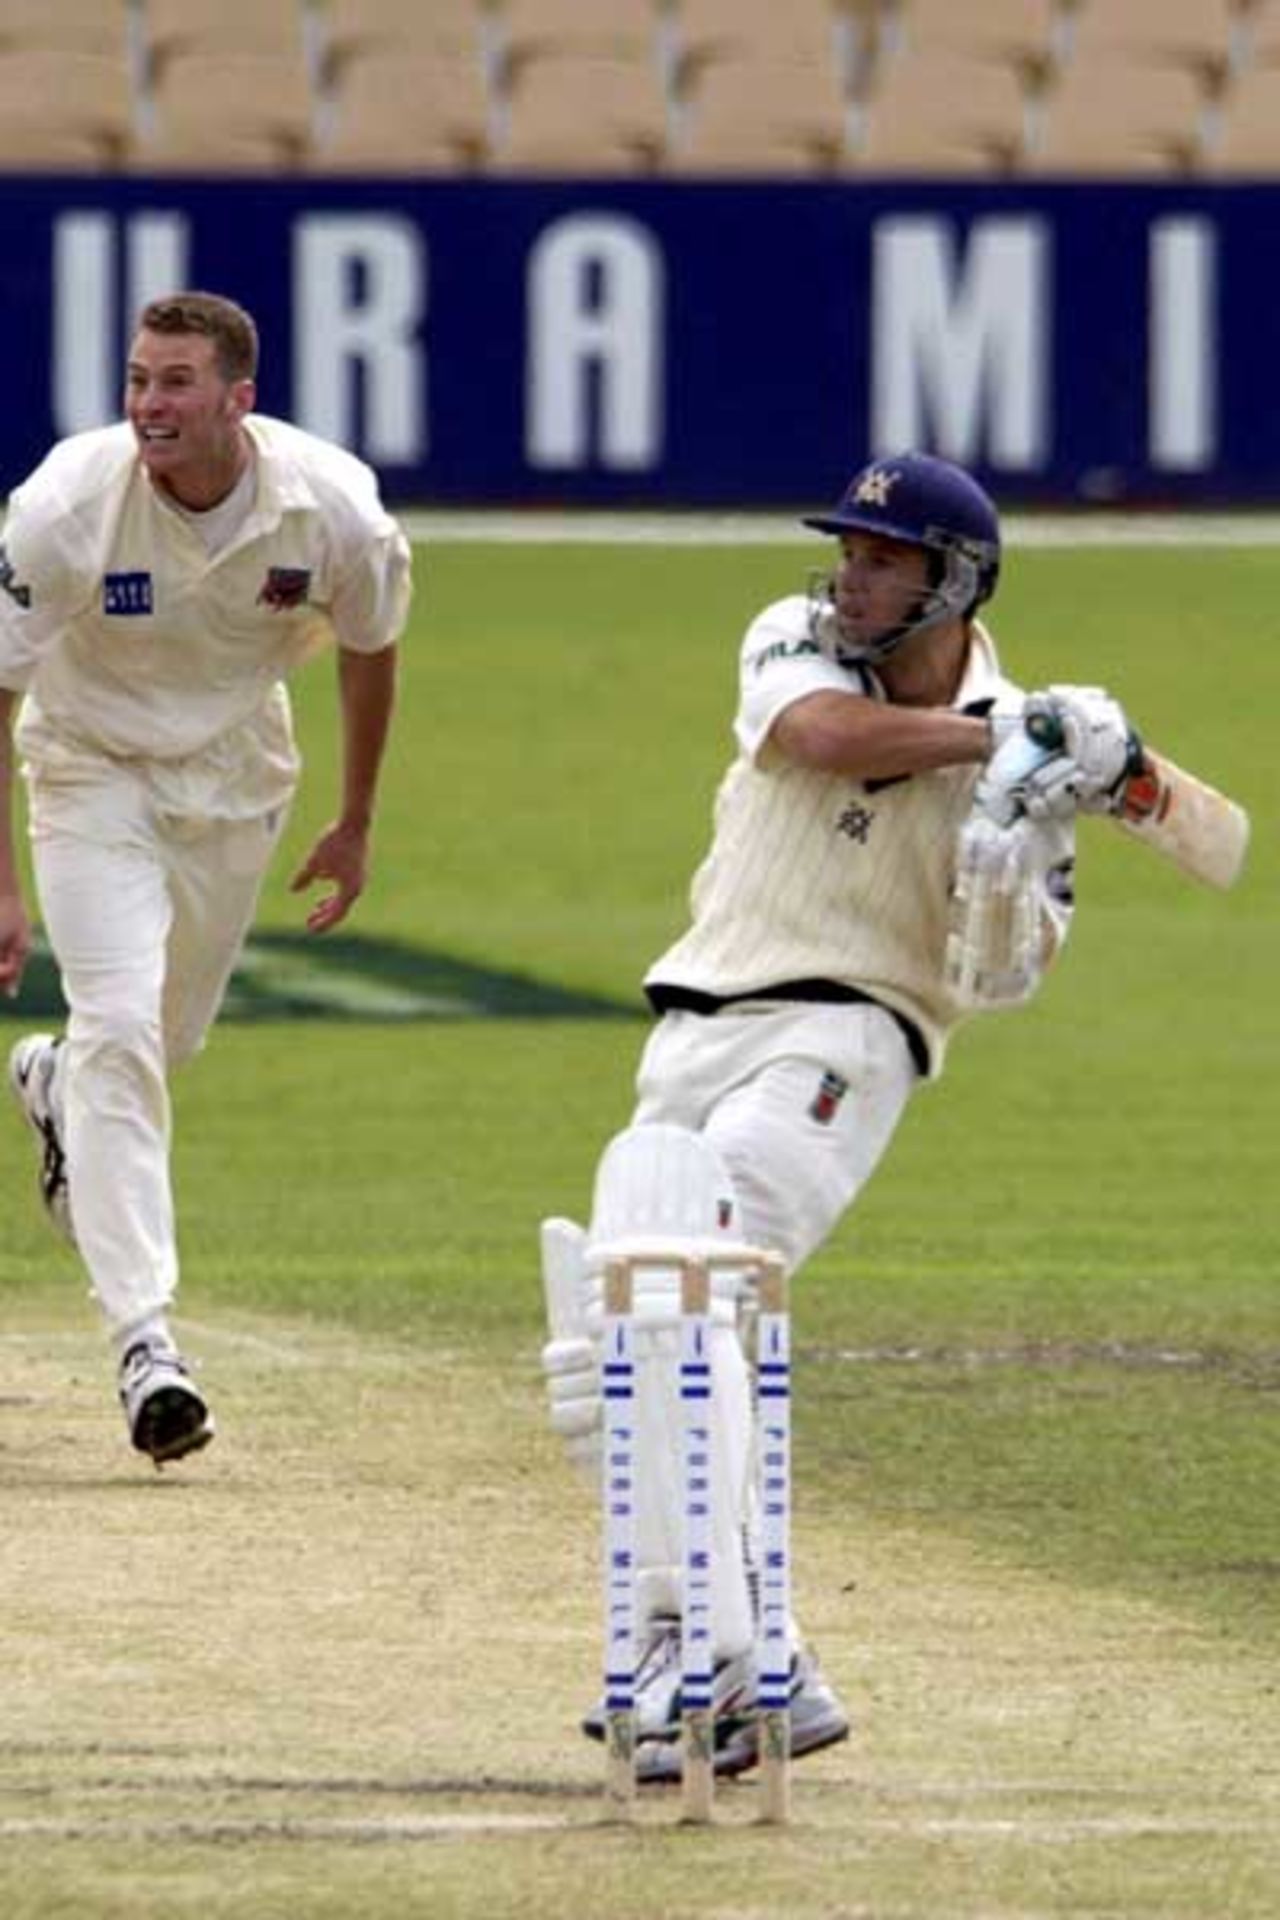 18 Oct 2001: Victorian batsman Brad Hodge watches the flight of his shot for 4 off Paul Rofe in the Pura Cup match between the Southern Redbacks and the Victoria Bushrangers played at Adelaide Oval, Adelaide, Australia.